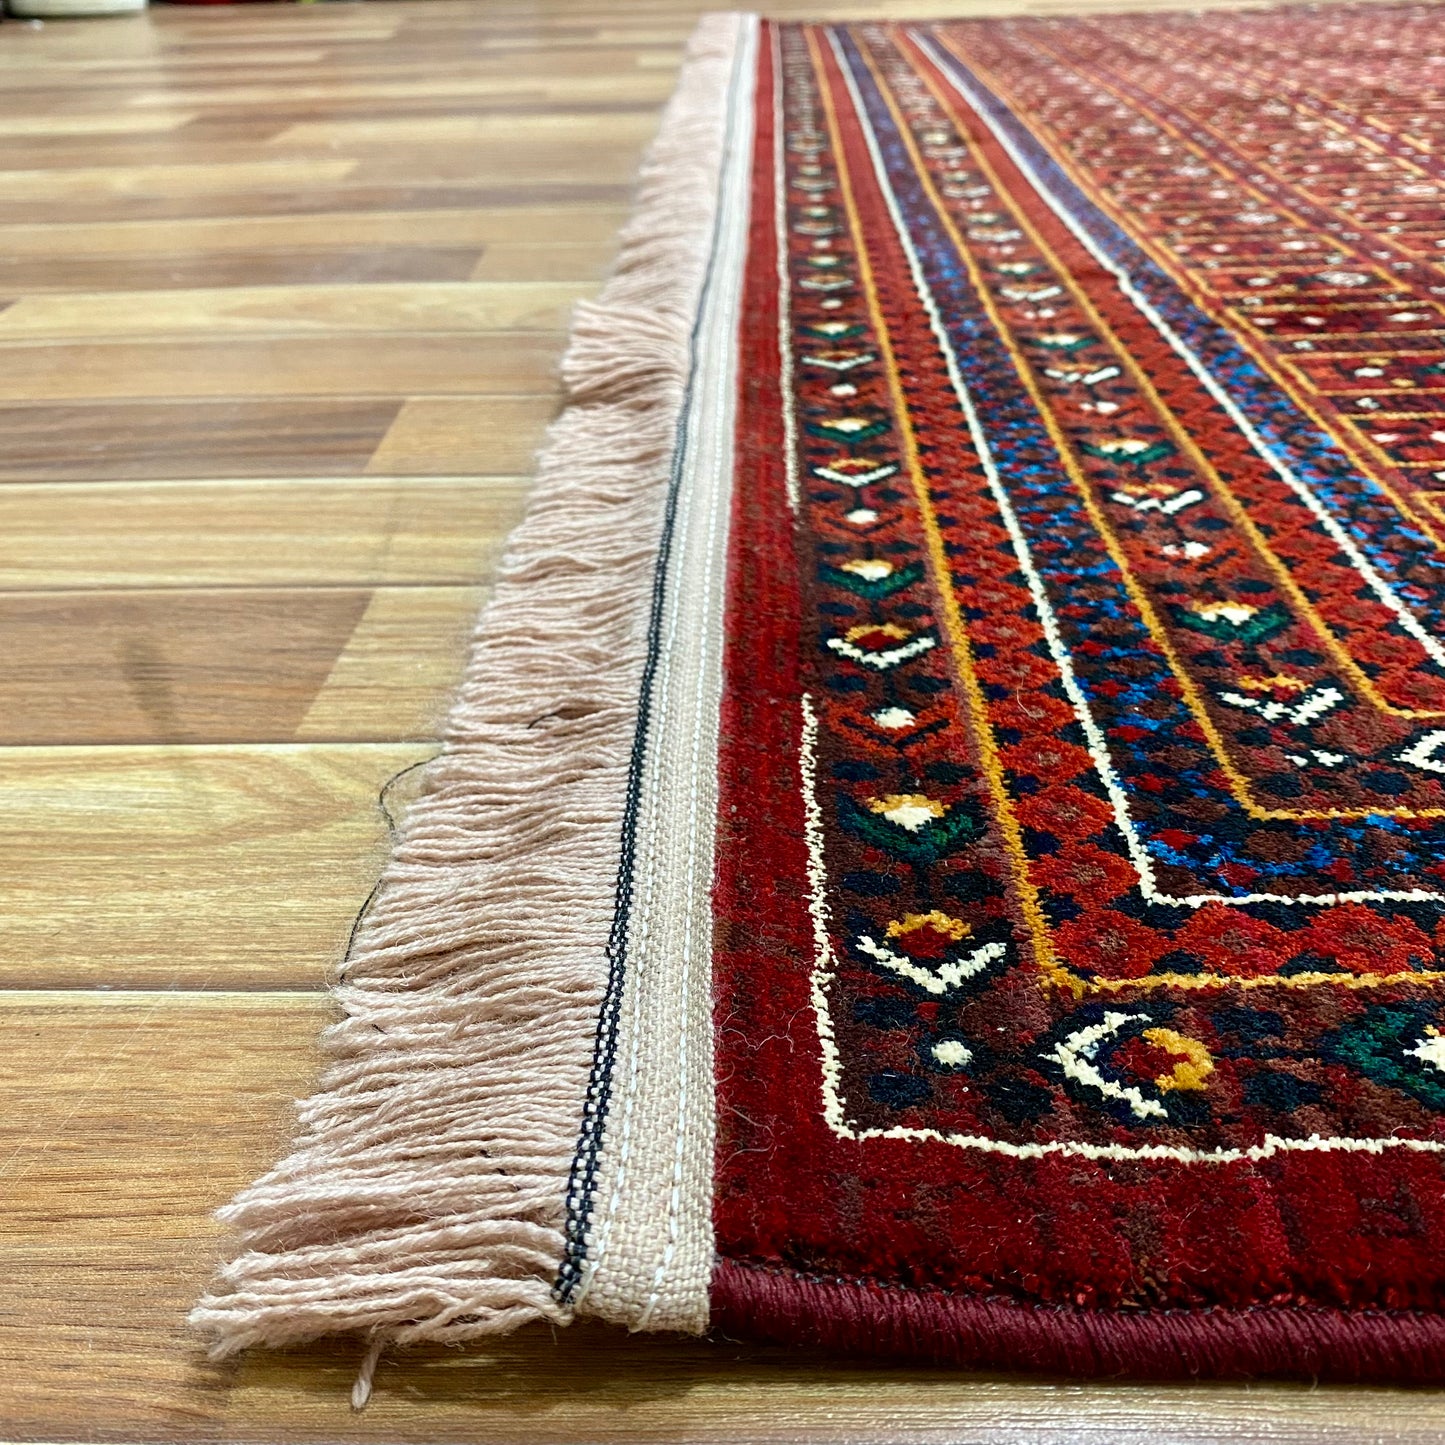 7 ft x 10 ft - Area Rug - Persian Baluchi 3 - Red Wine - Timeless Beauty for Your Home